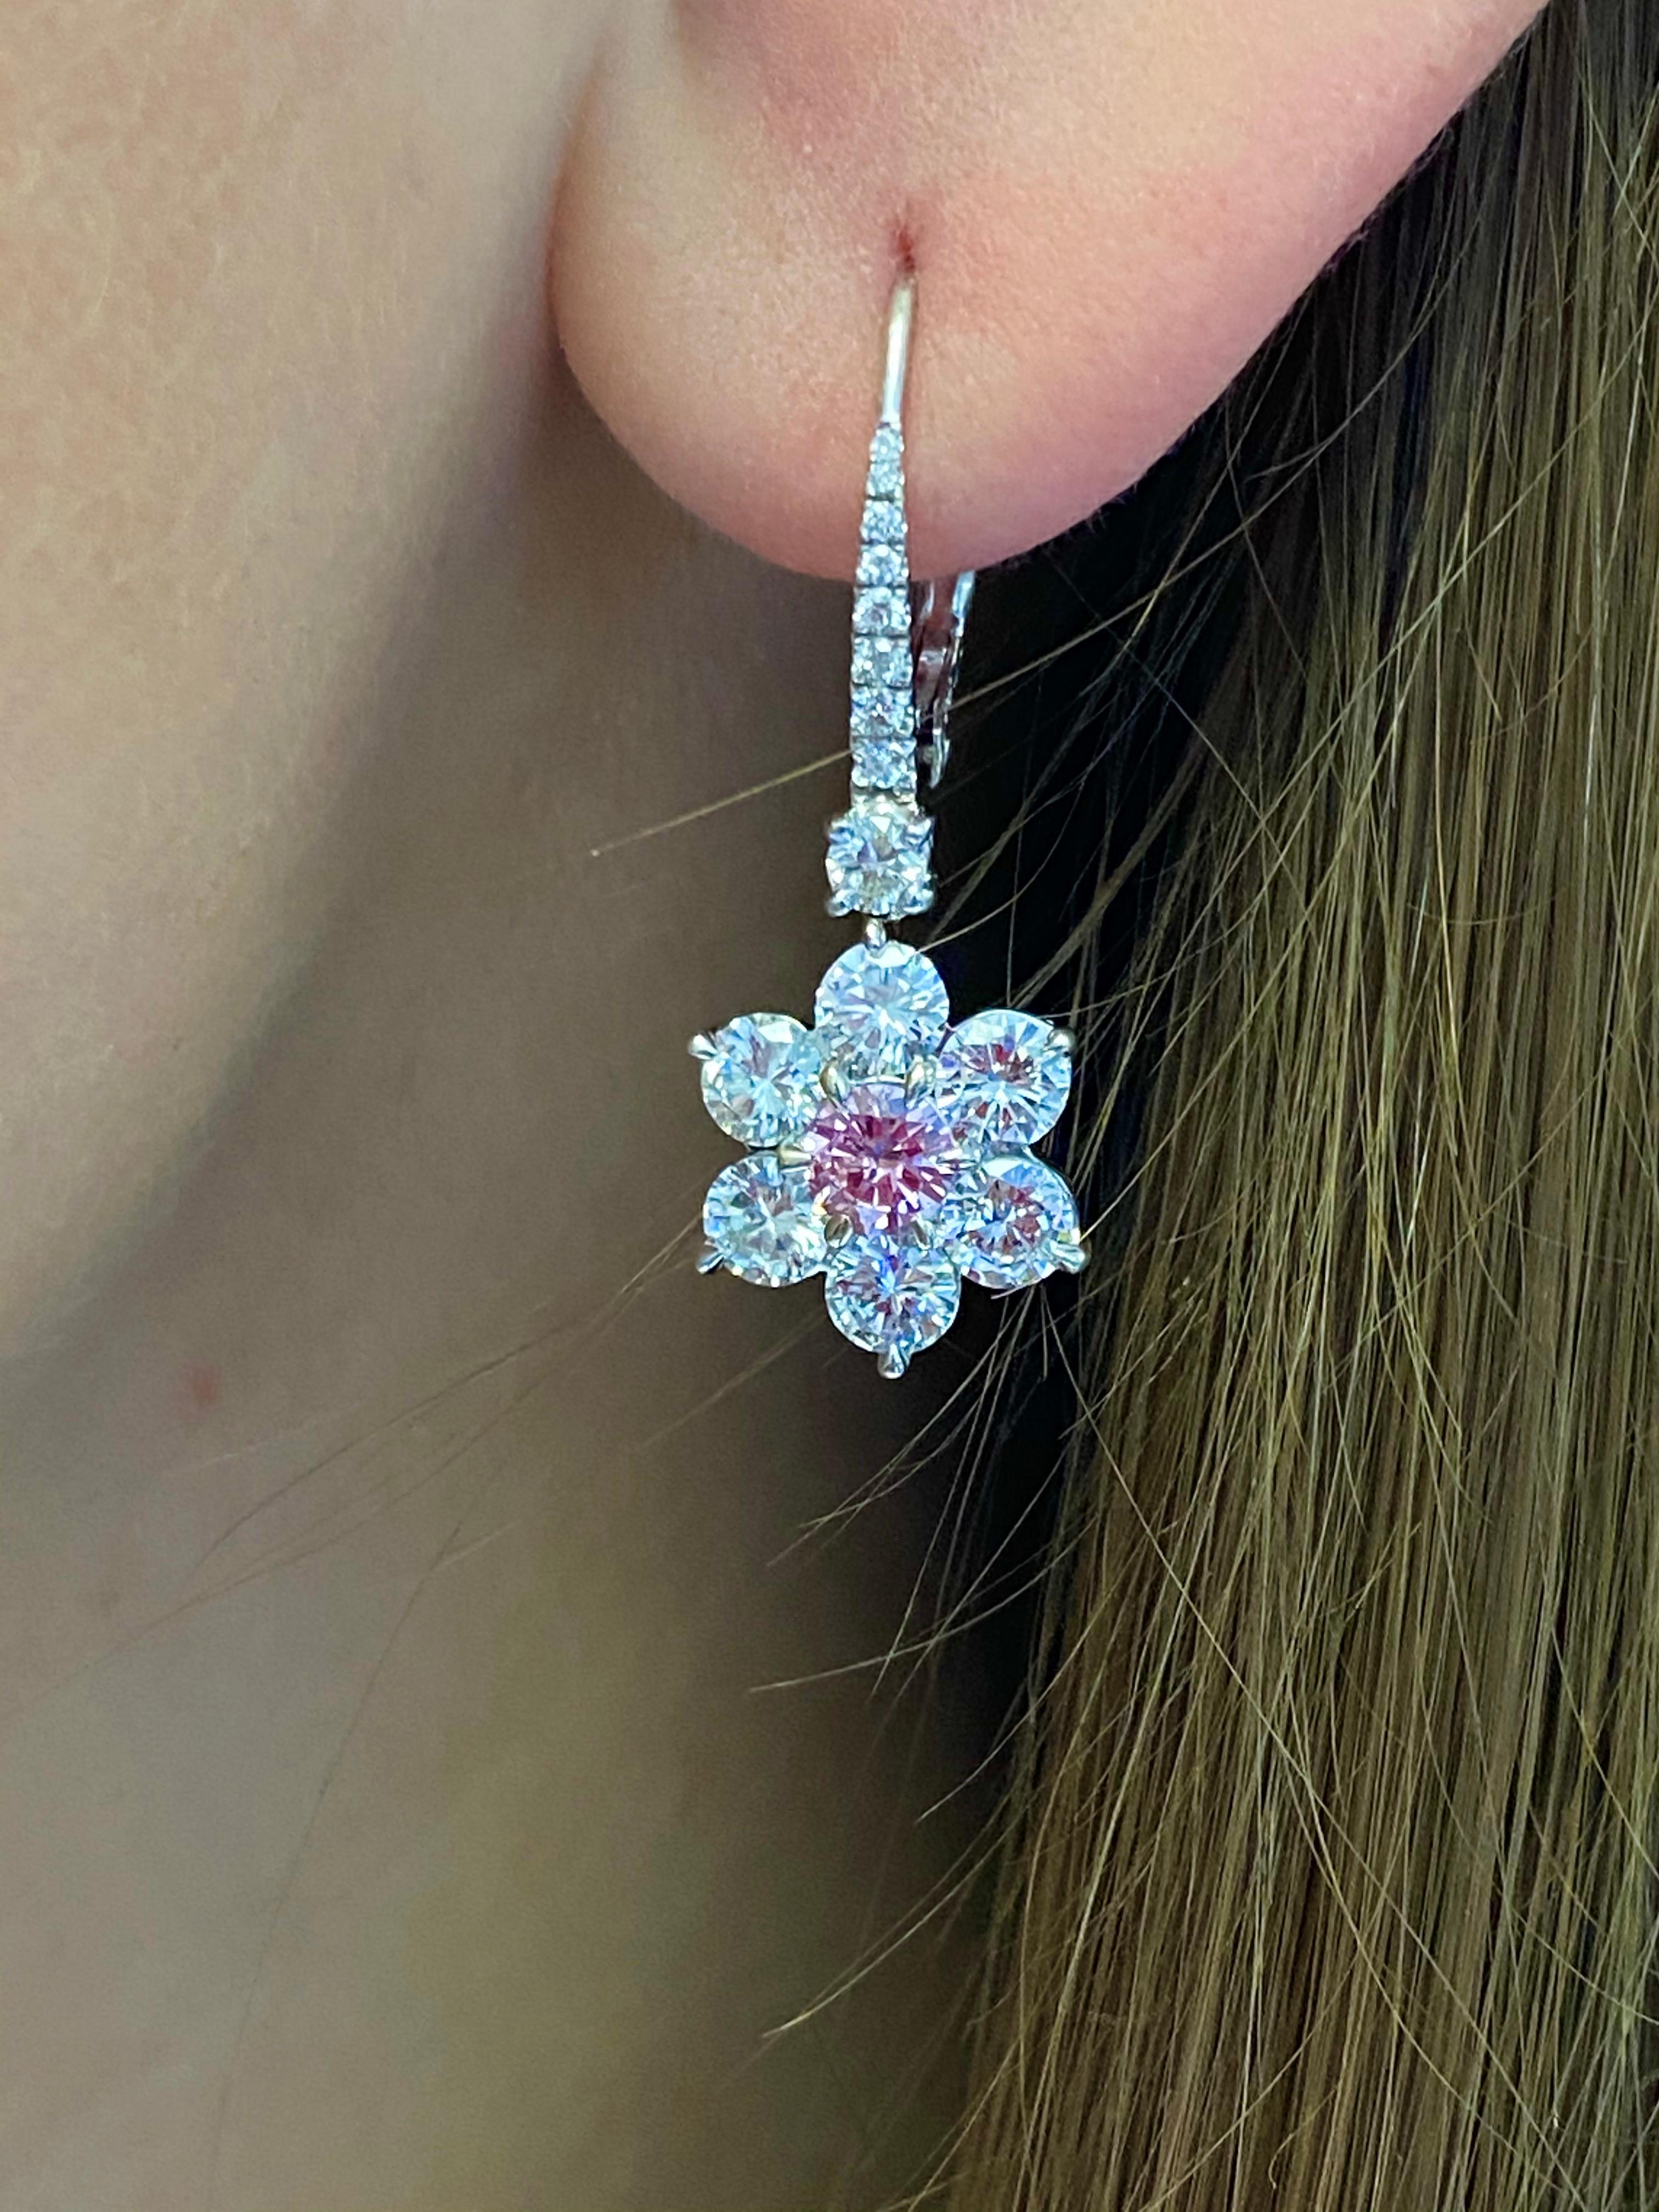 Nally Intense Purplish Pink and White Diamond Earrings.
This pair of earrings has 2center round brilliant diamonds weighing 0.56 carats  Fancy Intense Purplish Pink color &  GIA certified surrounded with 3.66ct of round brilliant diamonds set in